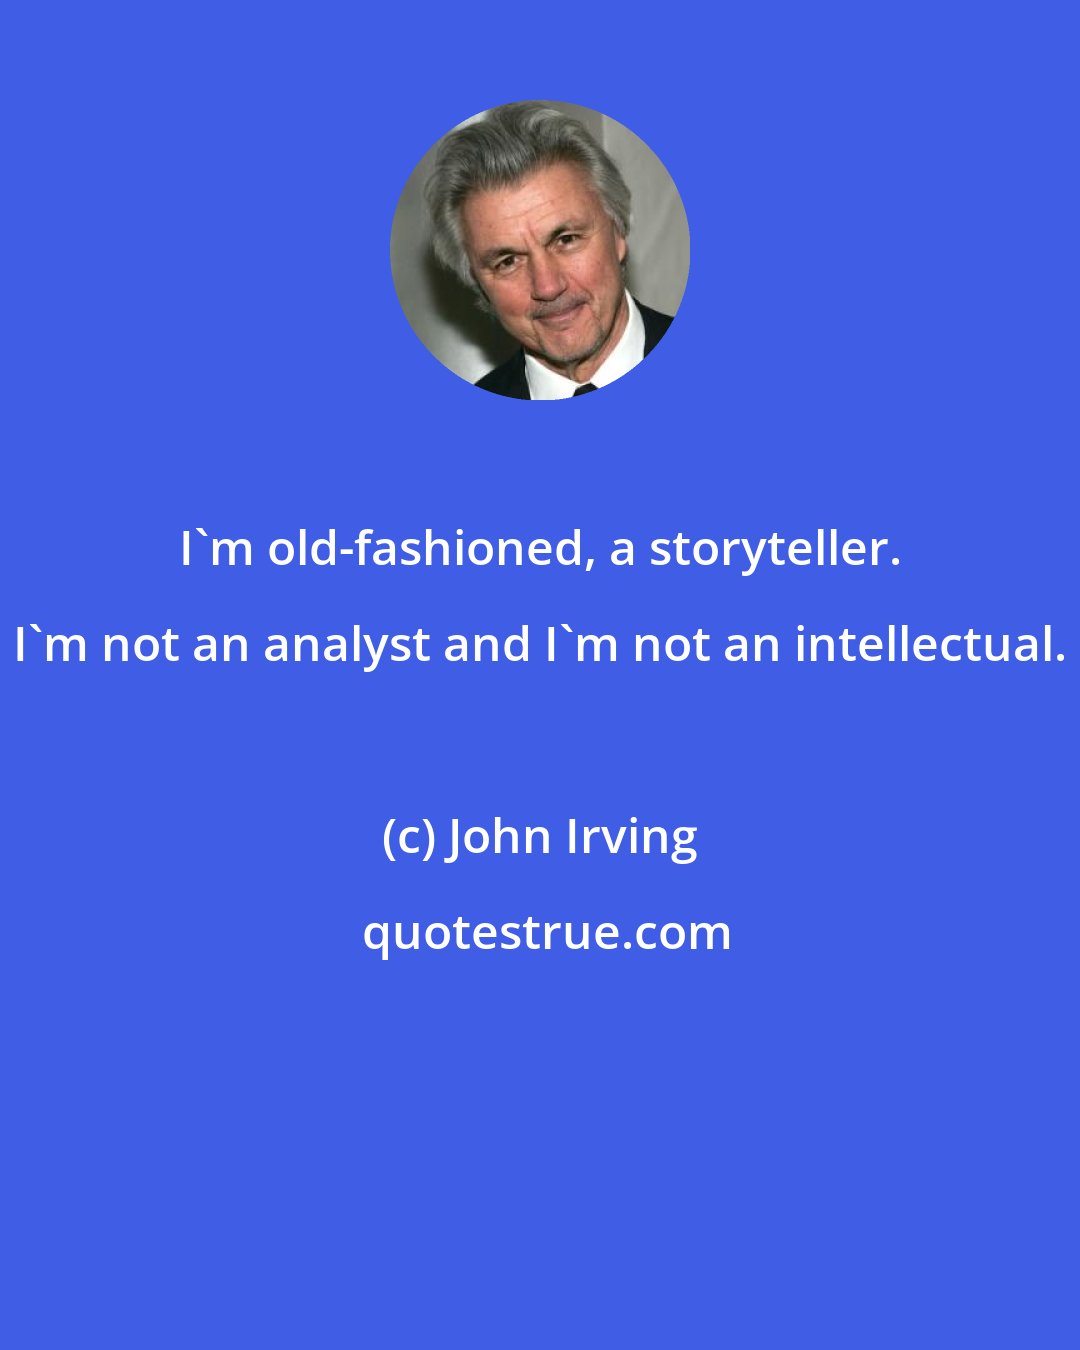 John Irving: I'm old-fashioned, a storyteller. I'm not an analyst and I'm not an intellectual.